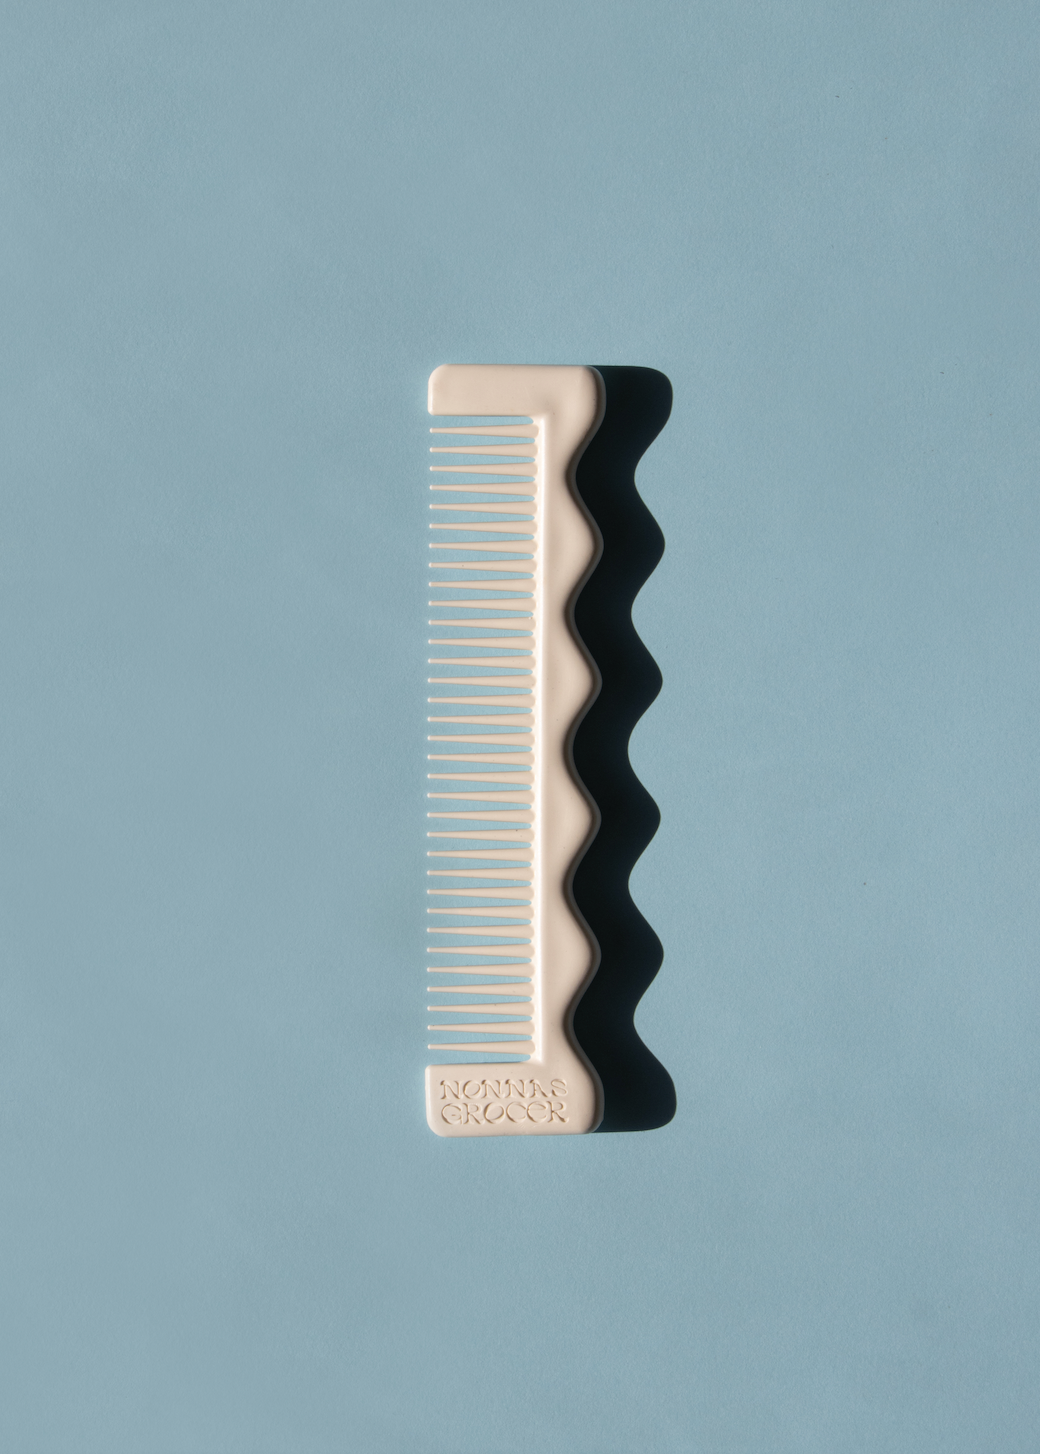 The Giuseppe ~ Fine tooth comb